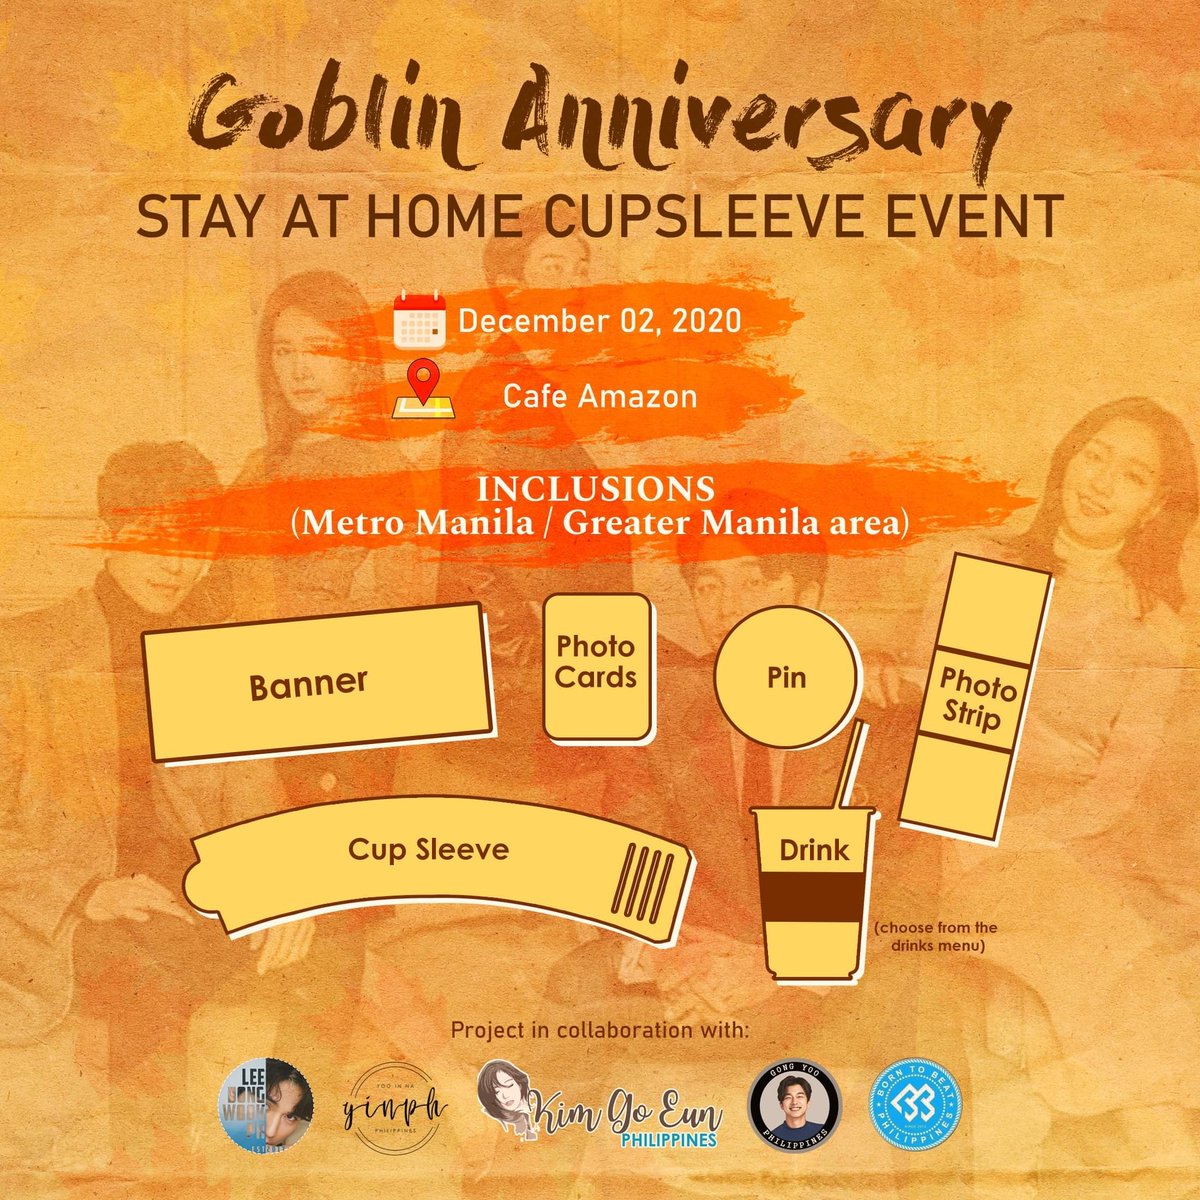 [EVENT NOTICE] It's been 4 years since one of the best dramas to ever hit KDramaland, aired. And together with  @kimgoeunphofc,  @LeeDongWook_PH  @officialyinph and  @BTOBPH we have planned the perfect way to celebrate Goblin's 4th Anniversary at the comfort of our homes.